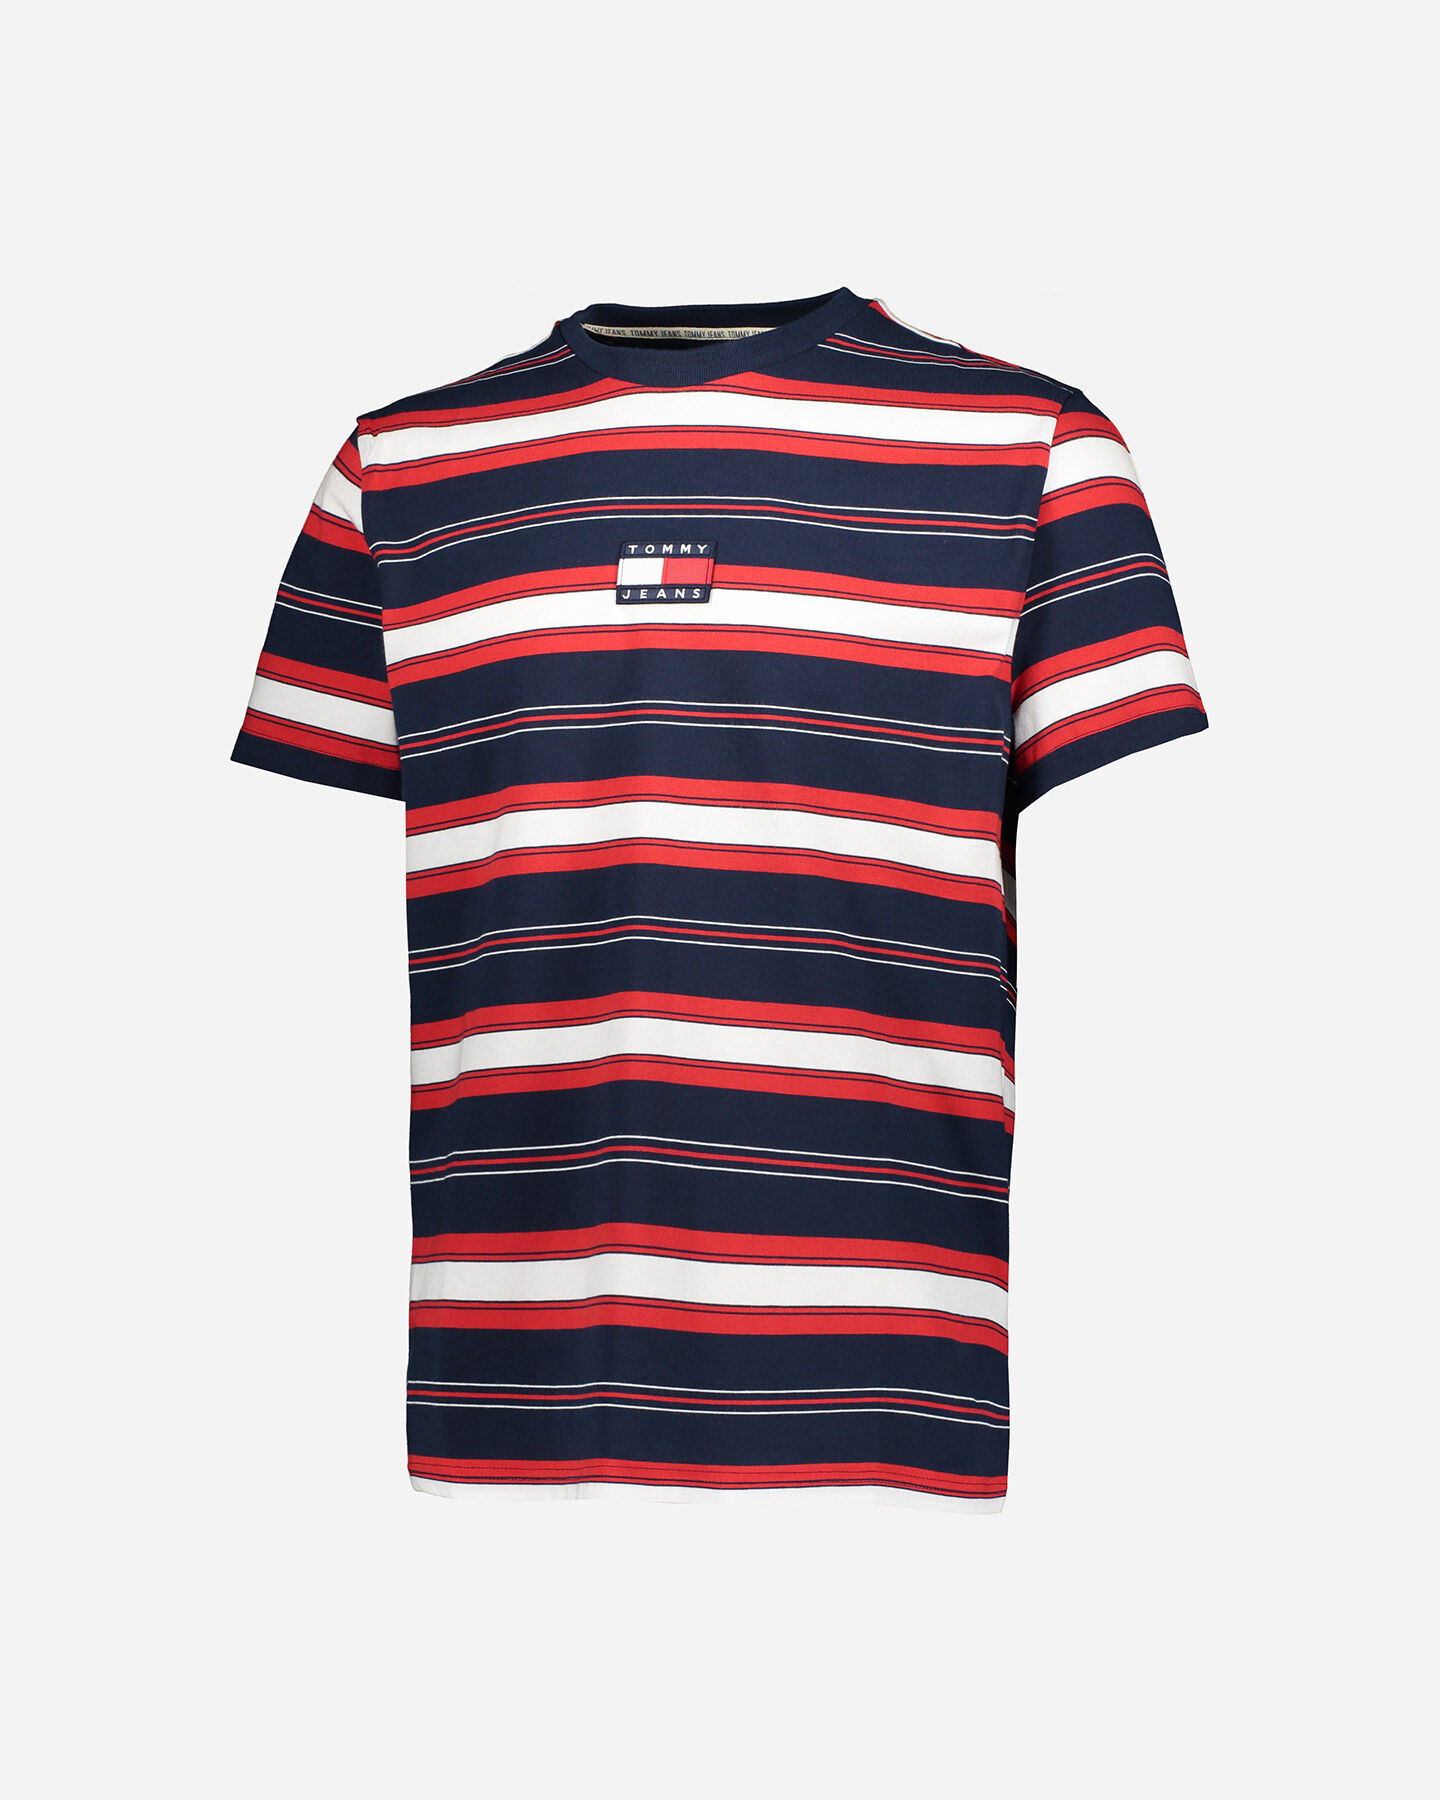  T-Shirt TOMMY HILFIGER STRIPES LOGO M S4076852|0A4|S scatto 0